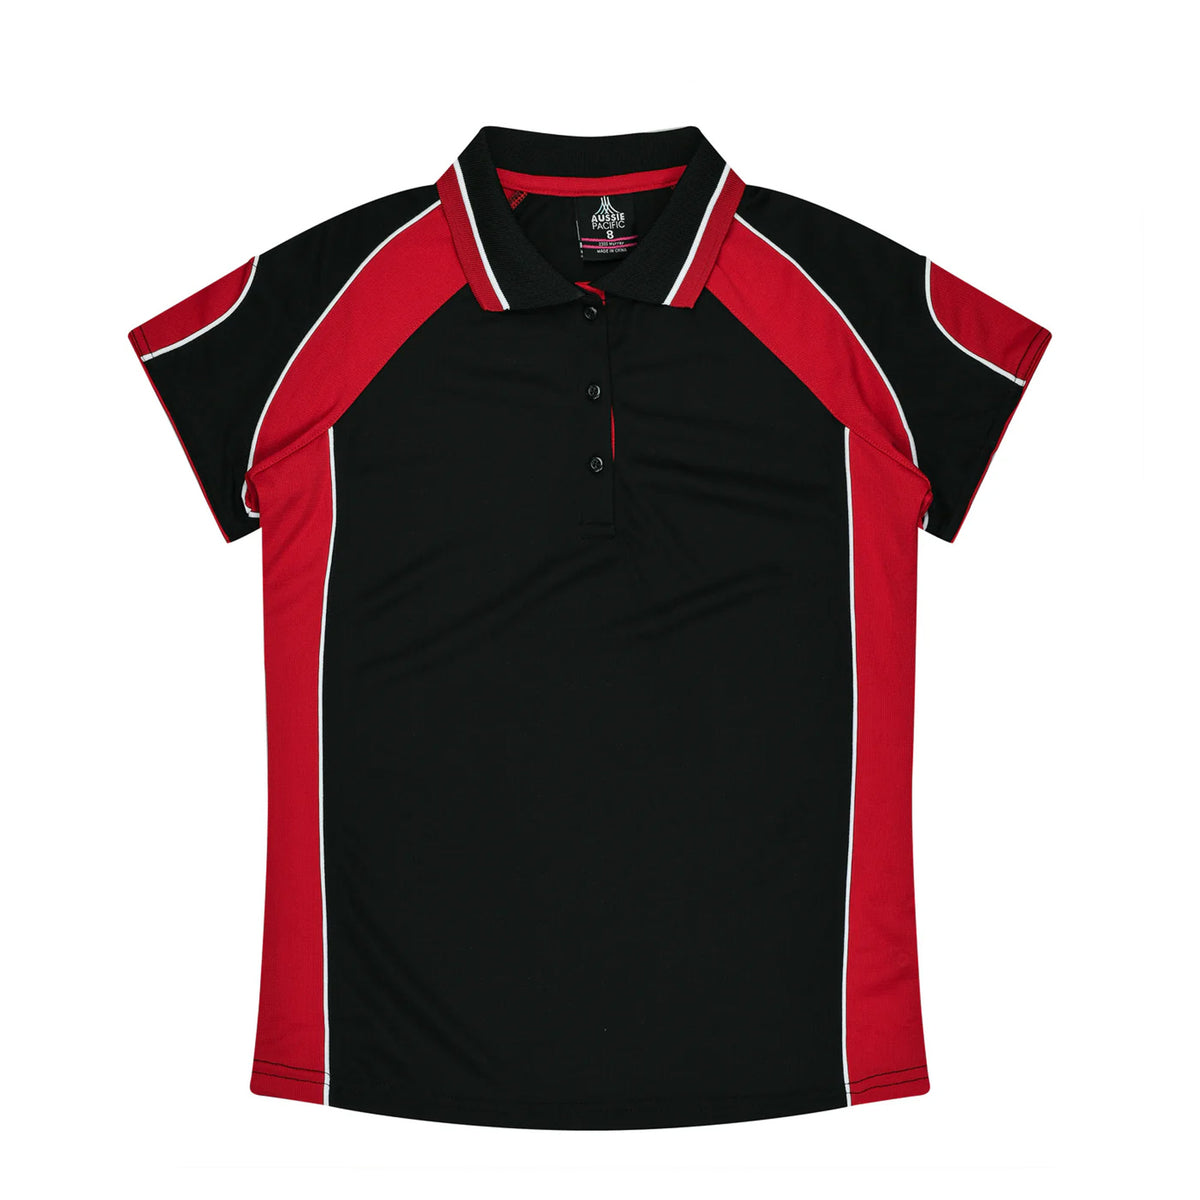 aussie pacific murray ladies polo in black red